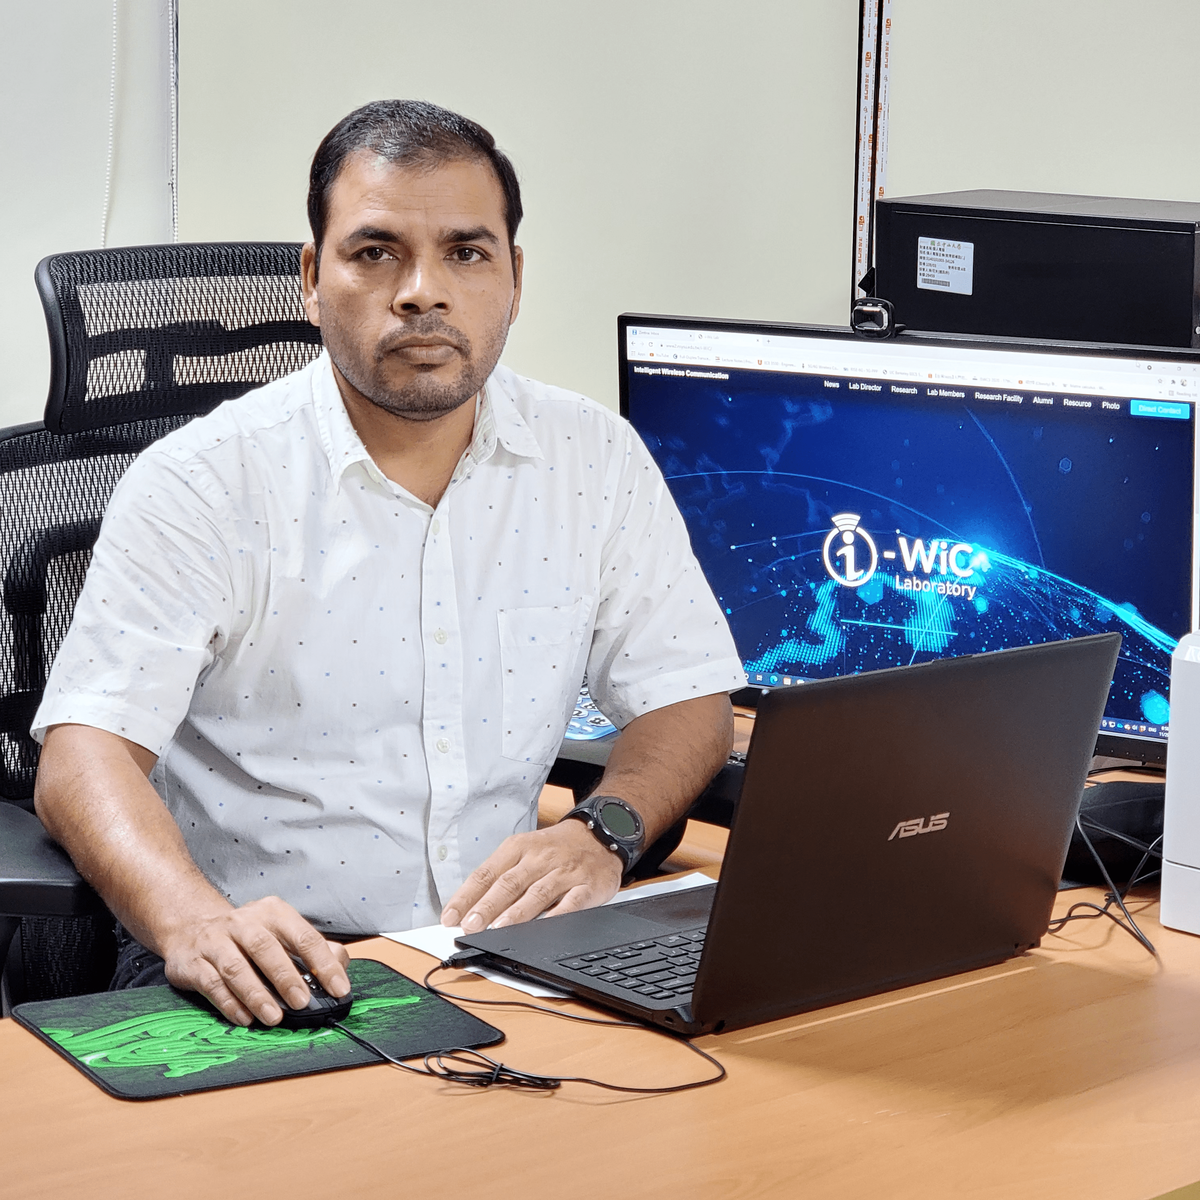 Assistant Professor Keshav Singh of NSYSU teaches at the Institute of Communications Engineering and the International Master’s Program in Telecommunication Engineering.